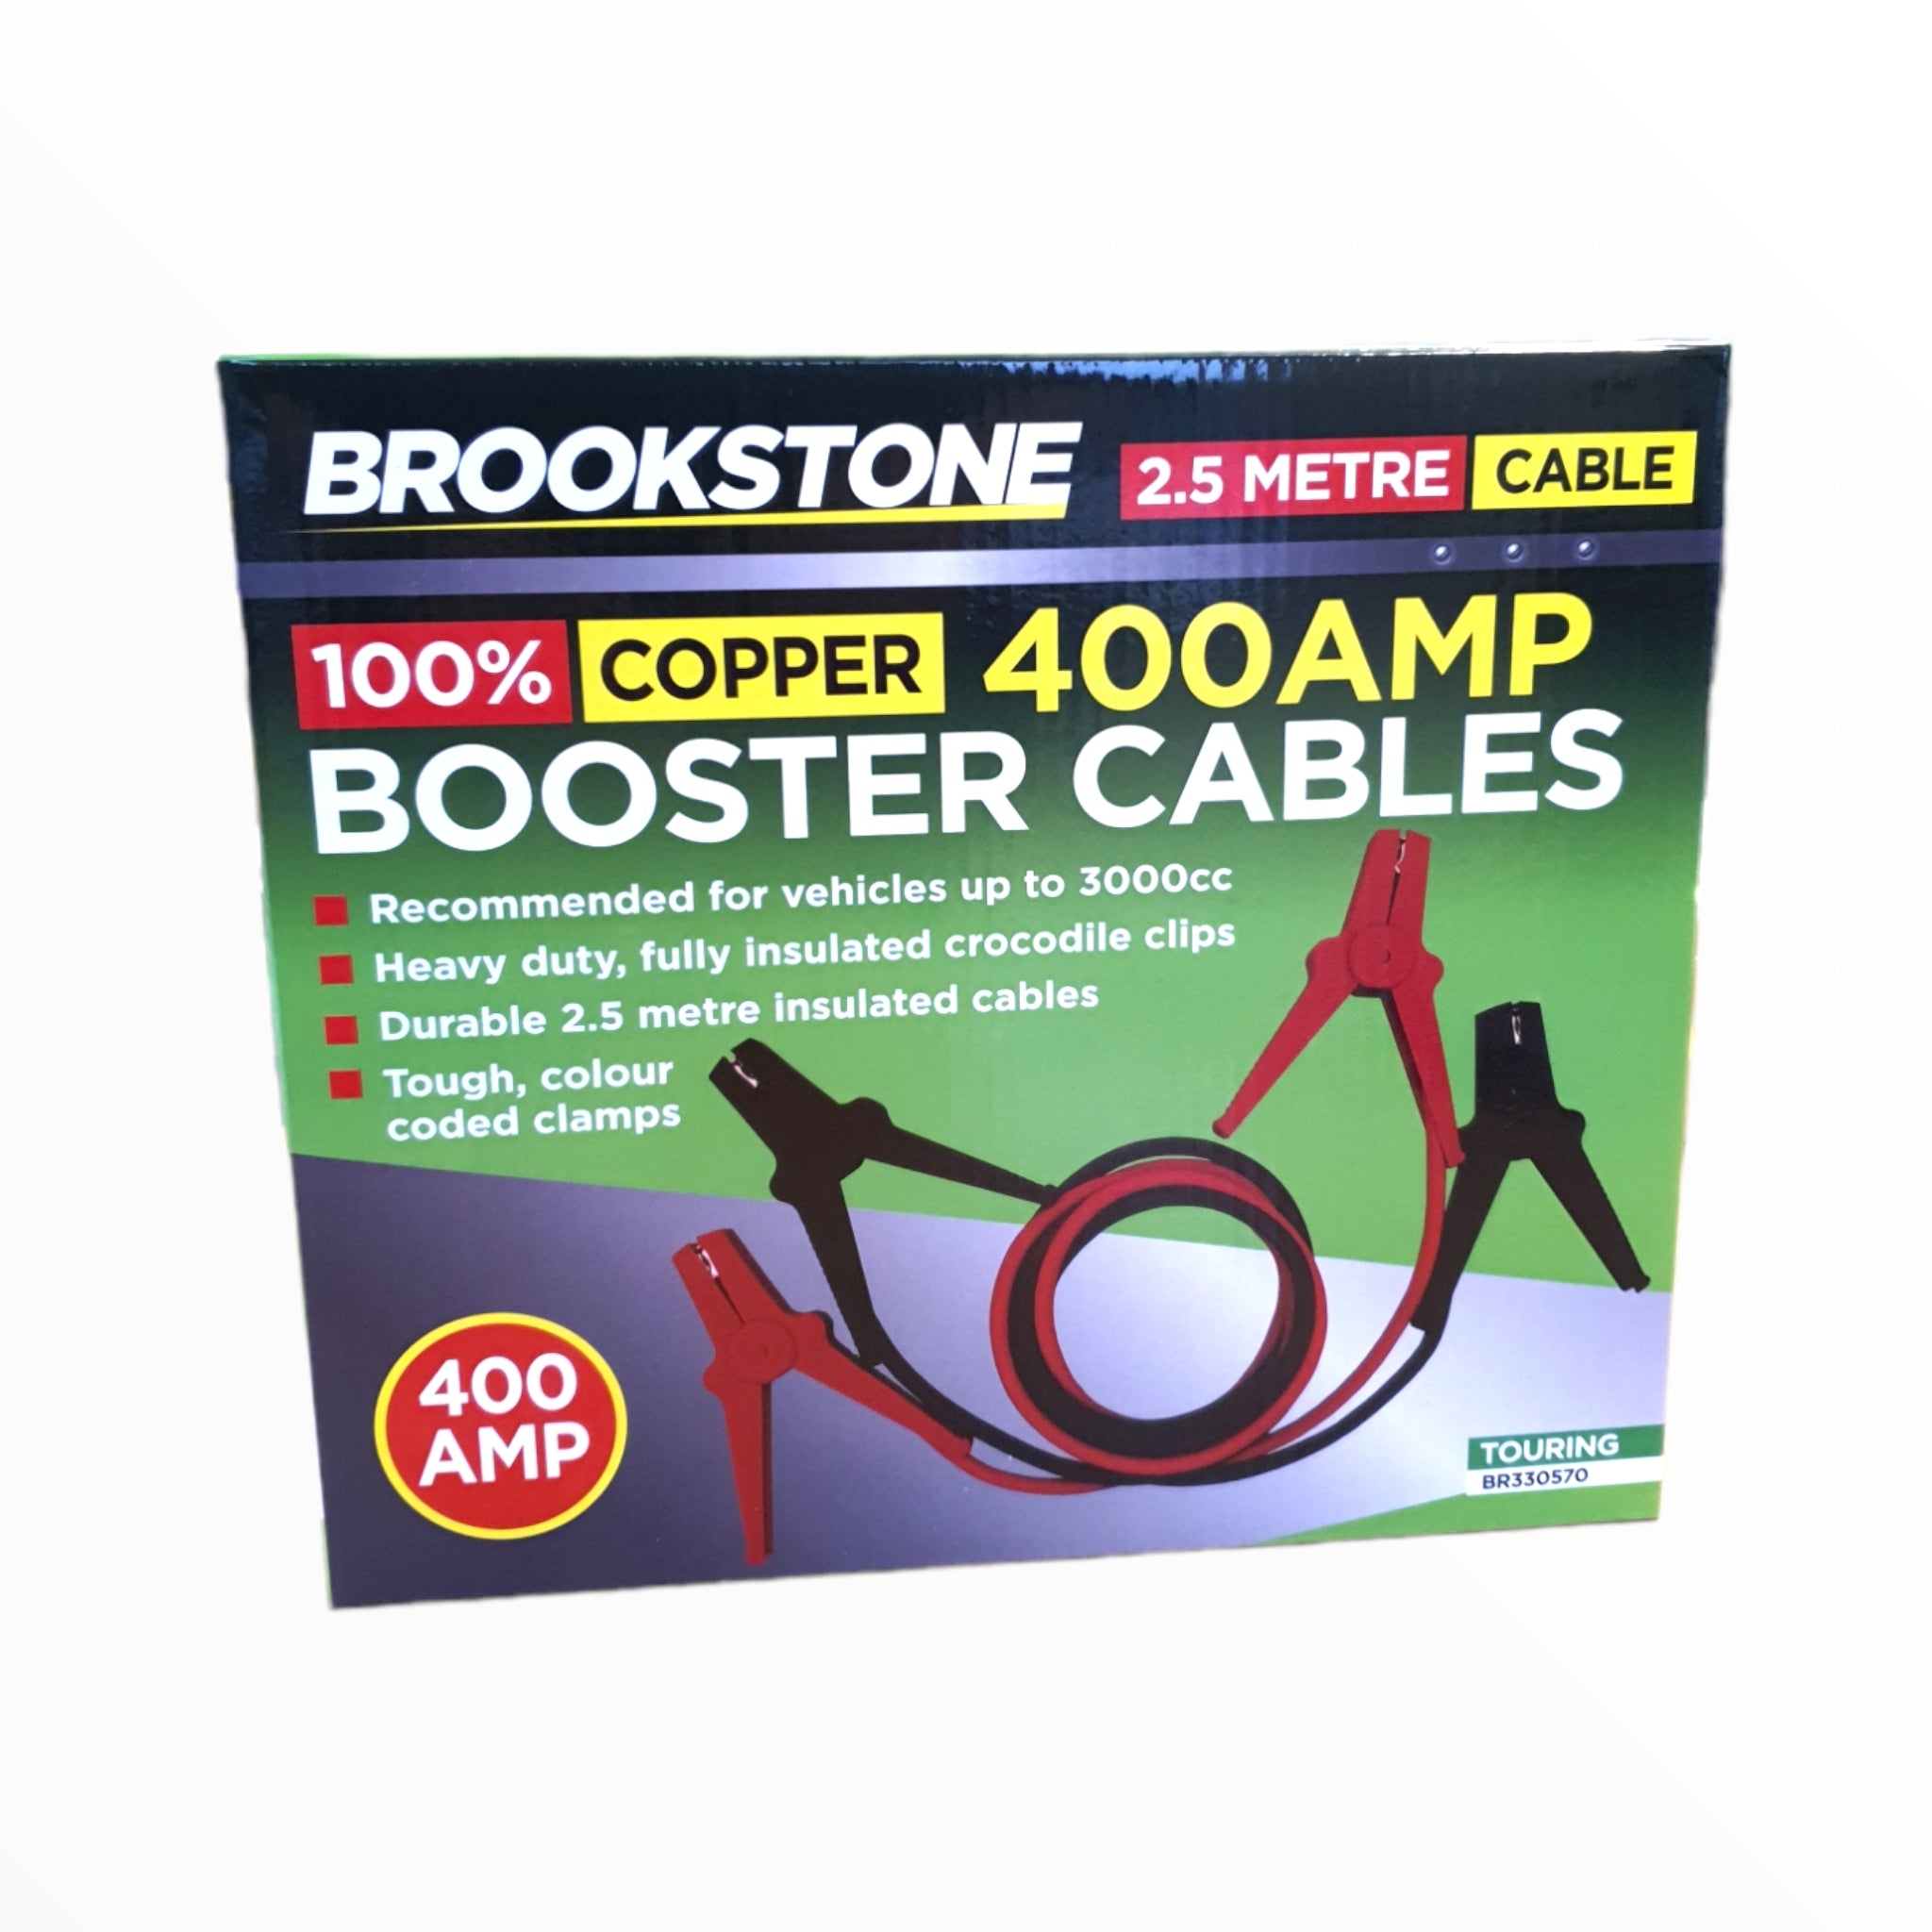 Brookstone 400amp Booster Cables